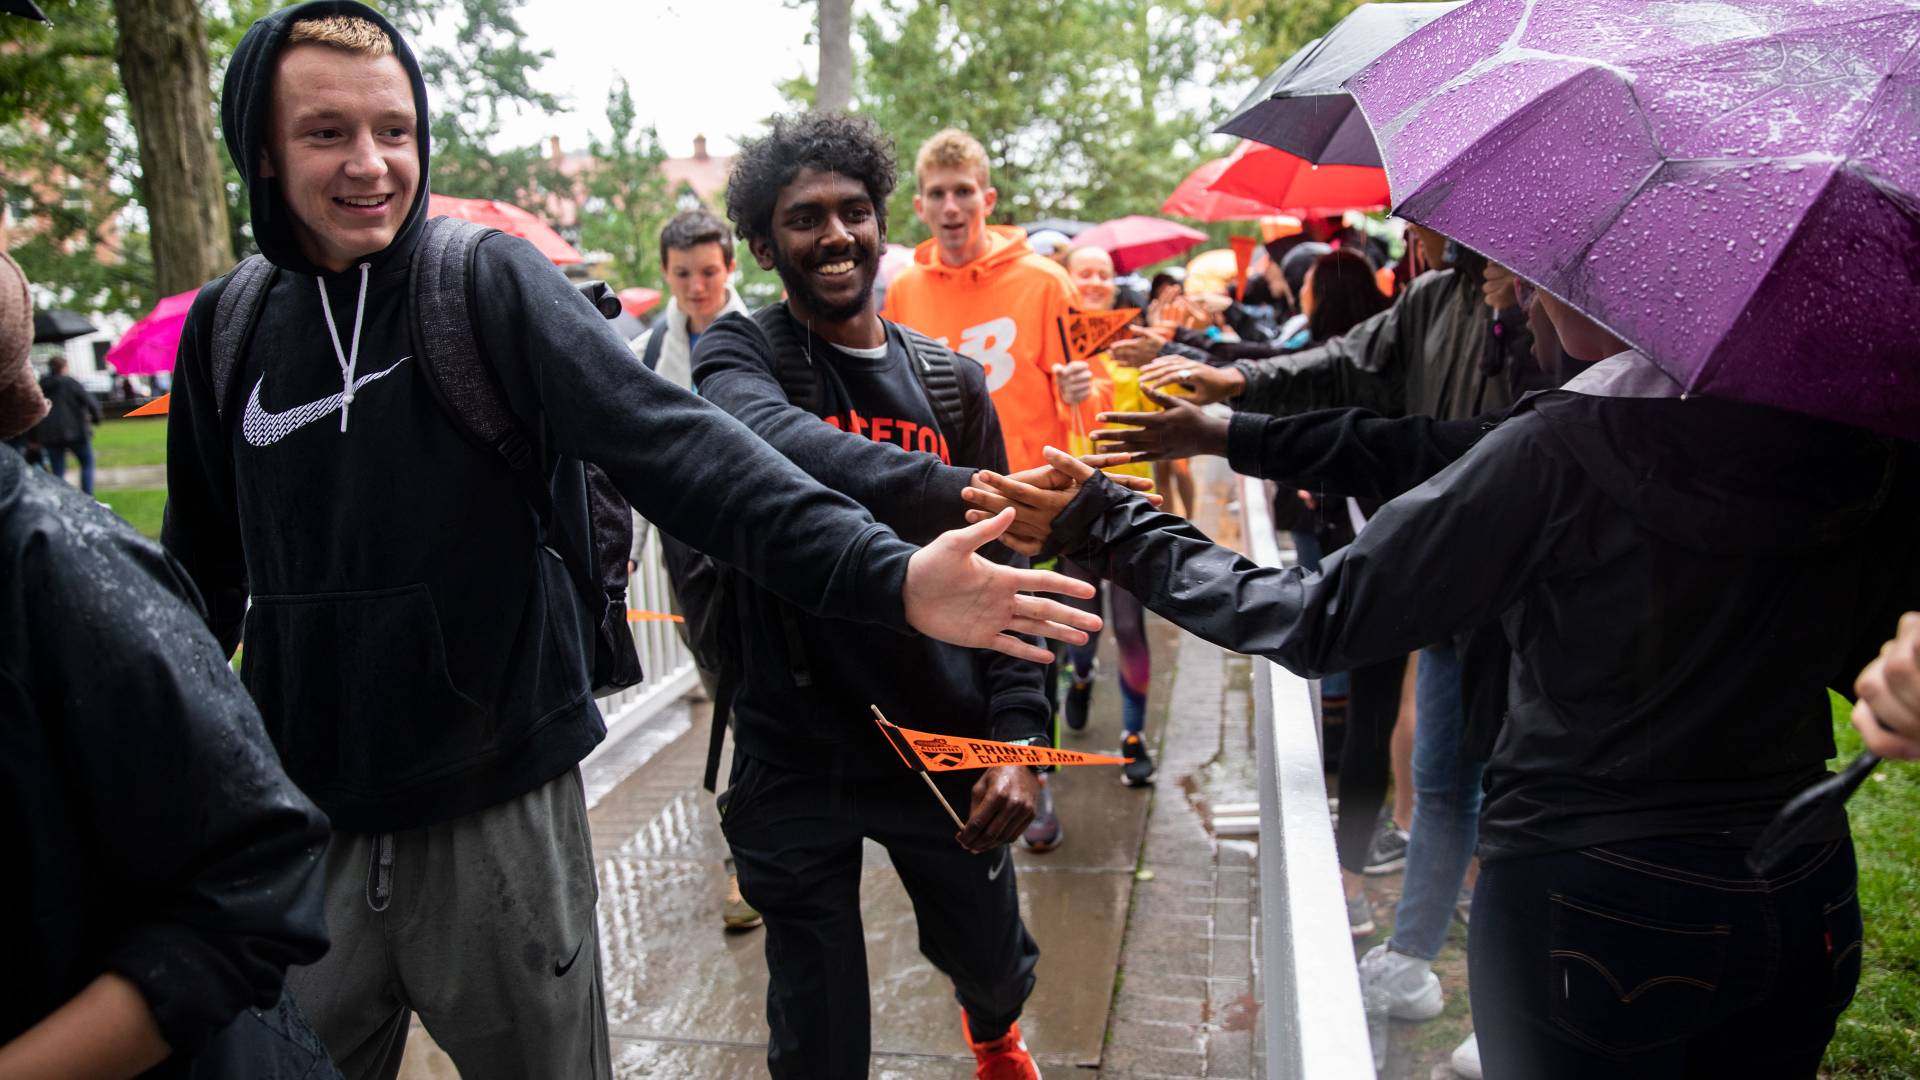 Students high-fiveing during Pre-rade